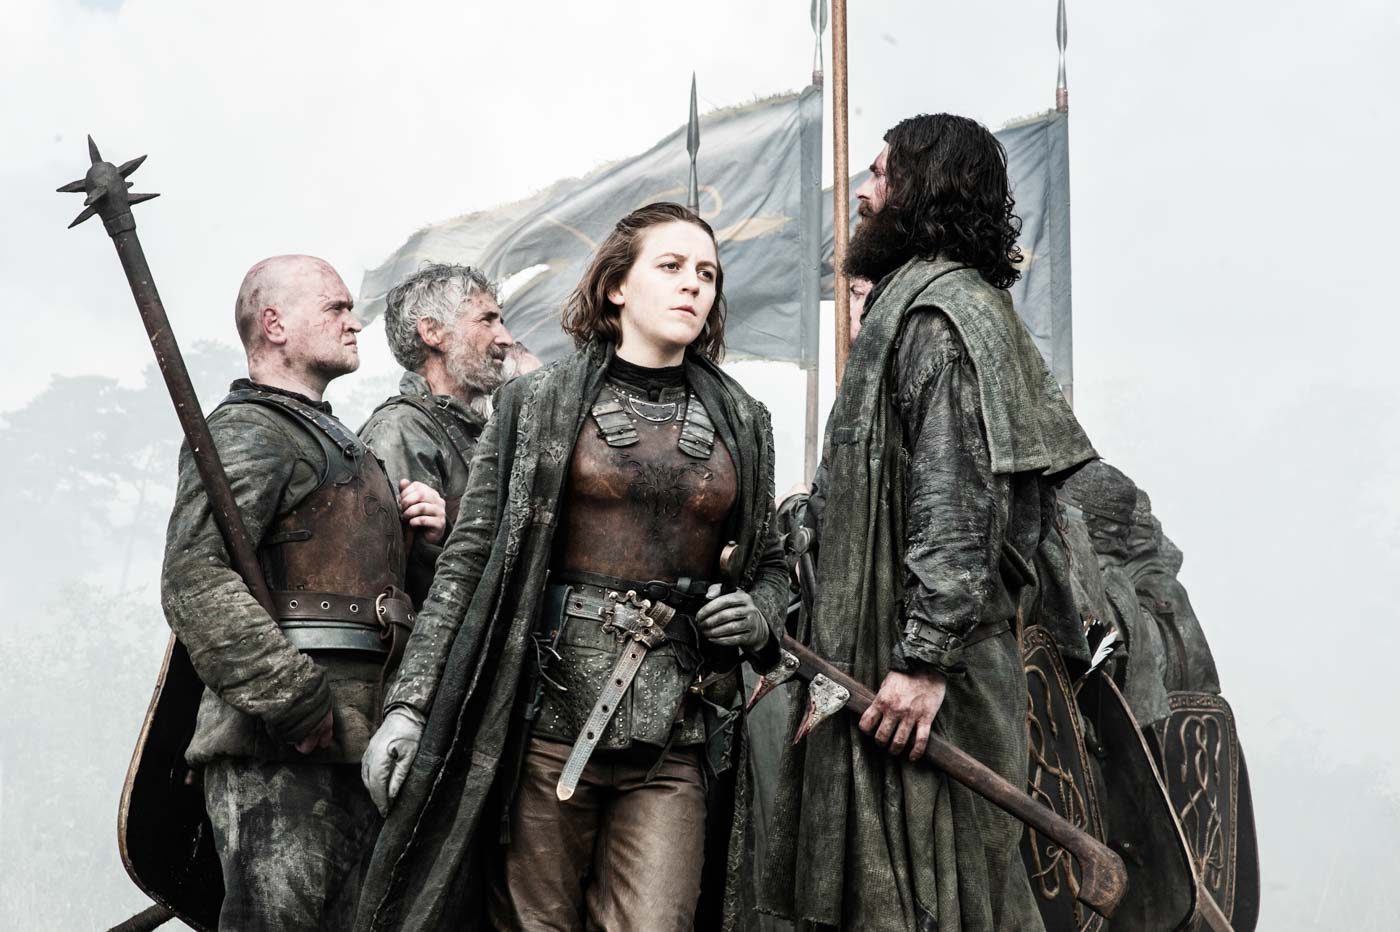 ‘Game of Thrones’ star Gemma Whelan on the show’s ‘clever’ ending, new drama ‘Gentleman Jack’